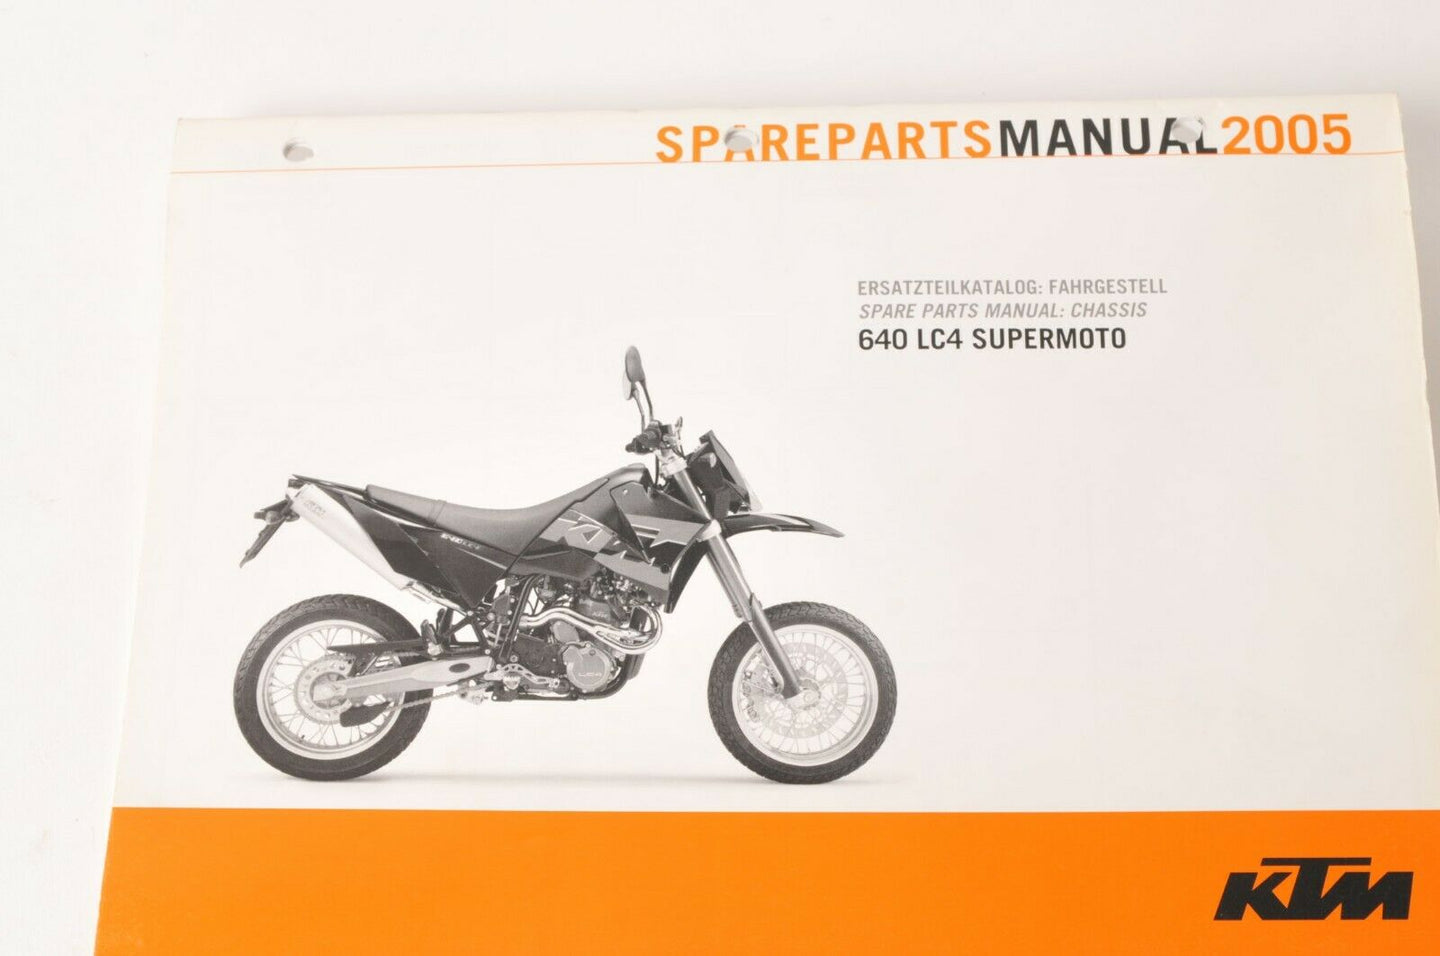 Genuine Factory KTM Spare Parts Manual Chassis - 640 LC4 Supermoto 05 | 3208182